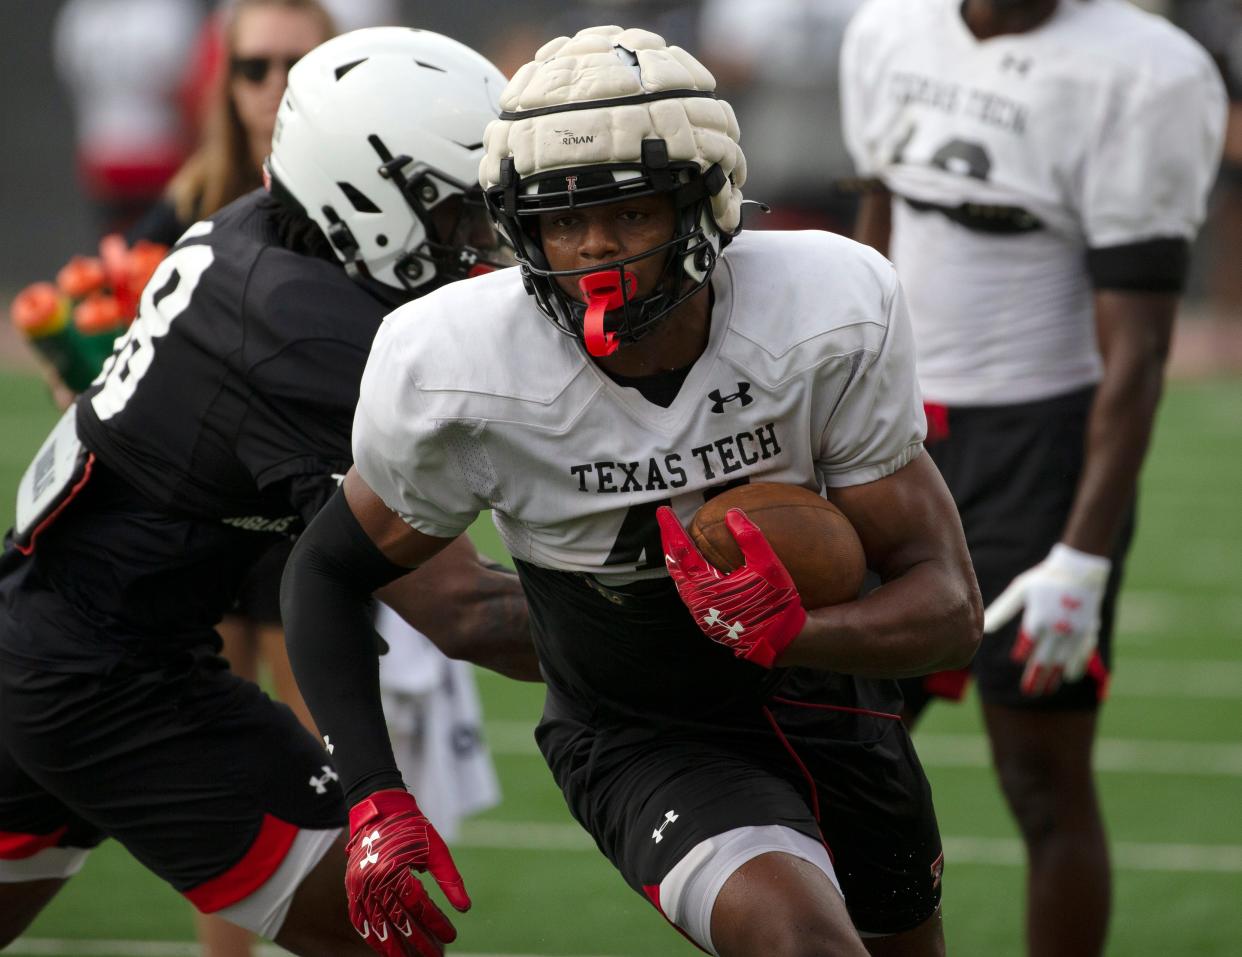 Texas Tech tight end Jayden York runs after a catch during a practice before the 2022 season. York, who joined the Red Raiders as a recruited walk-on and worked his way up to being a member of the tight-ends rotation, announced Wednesday he will transfer out of the program.